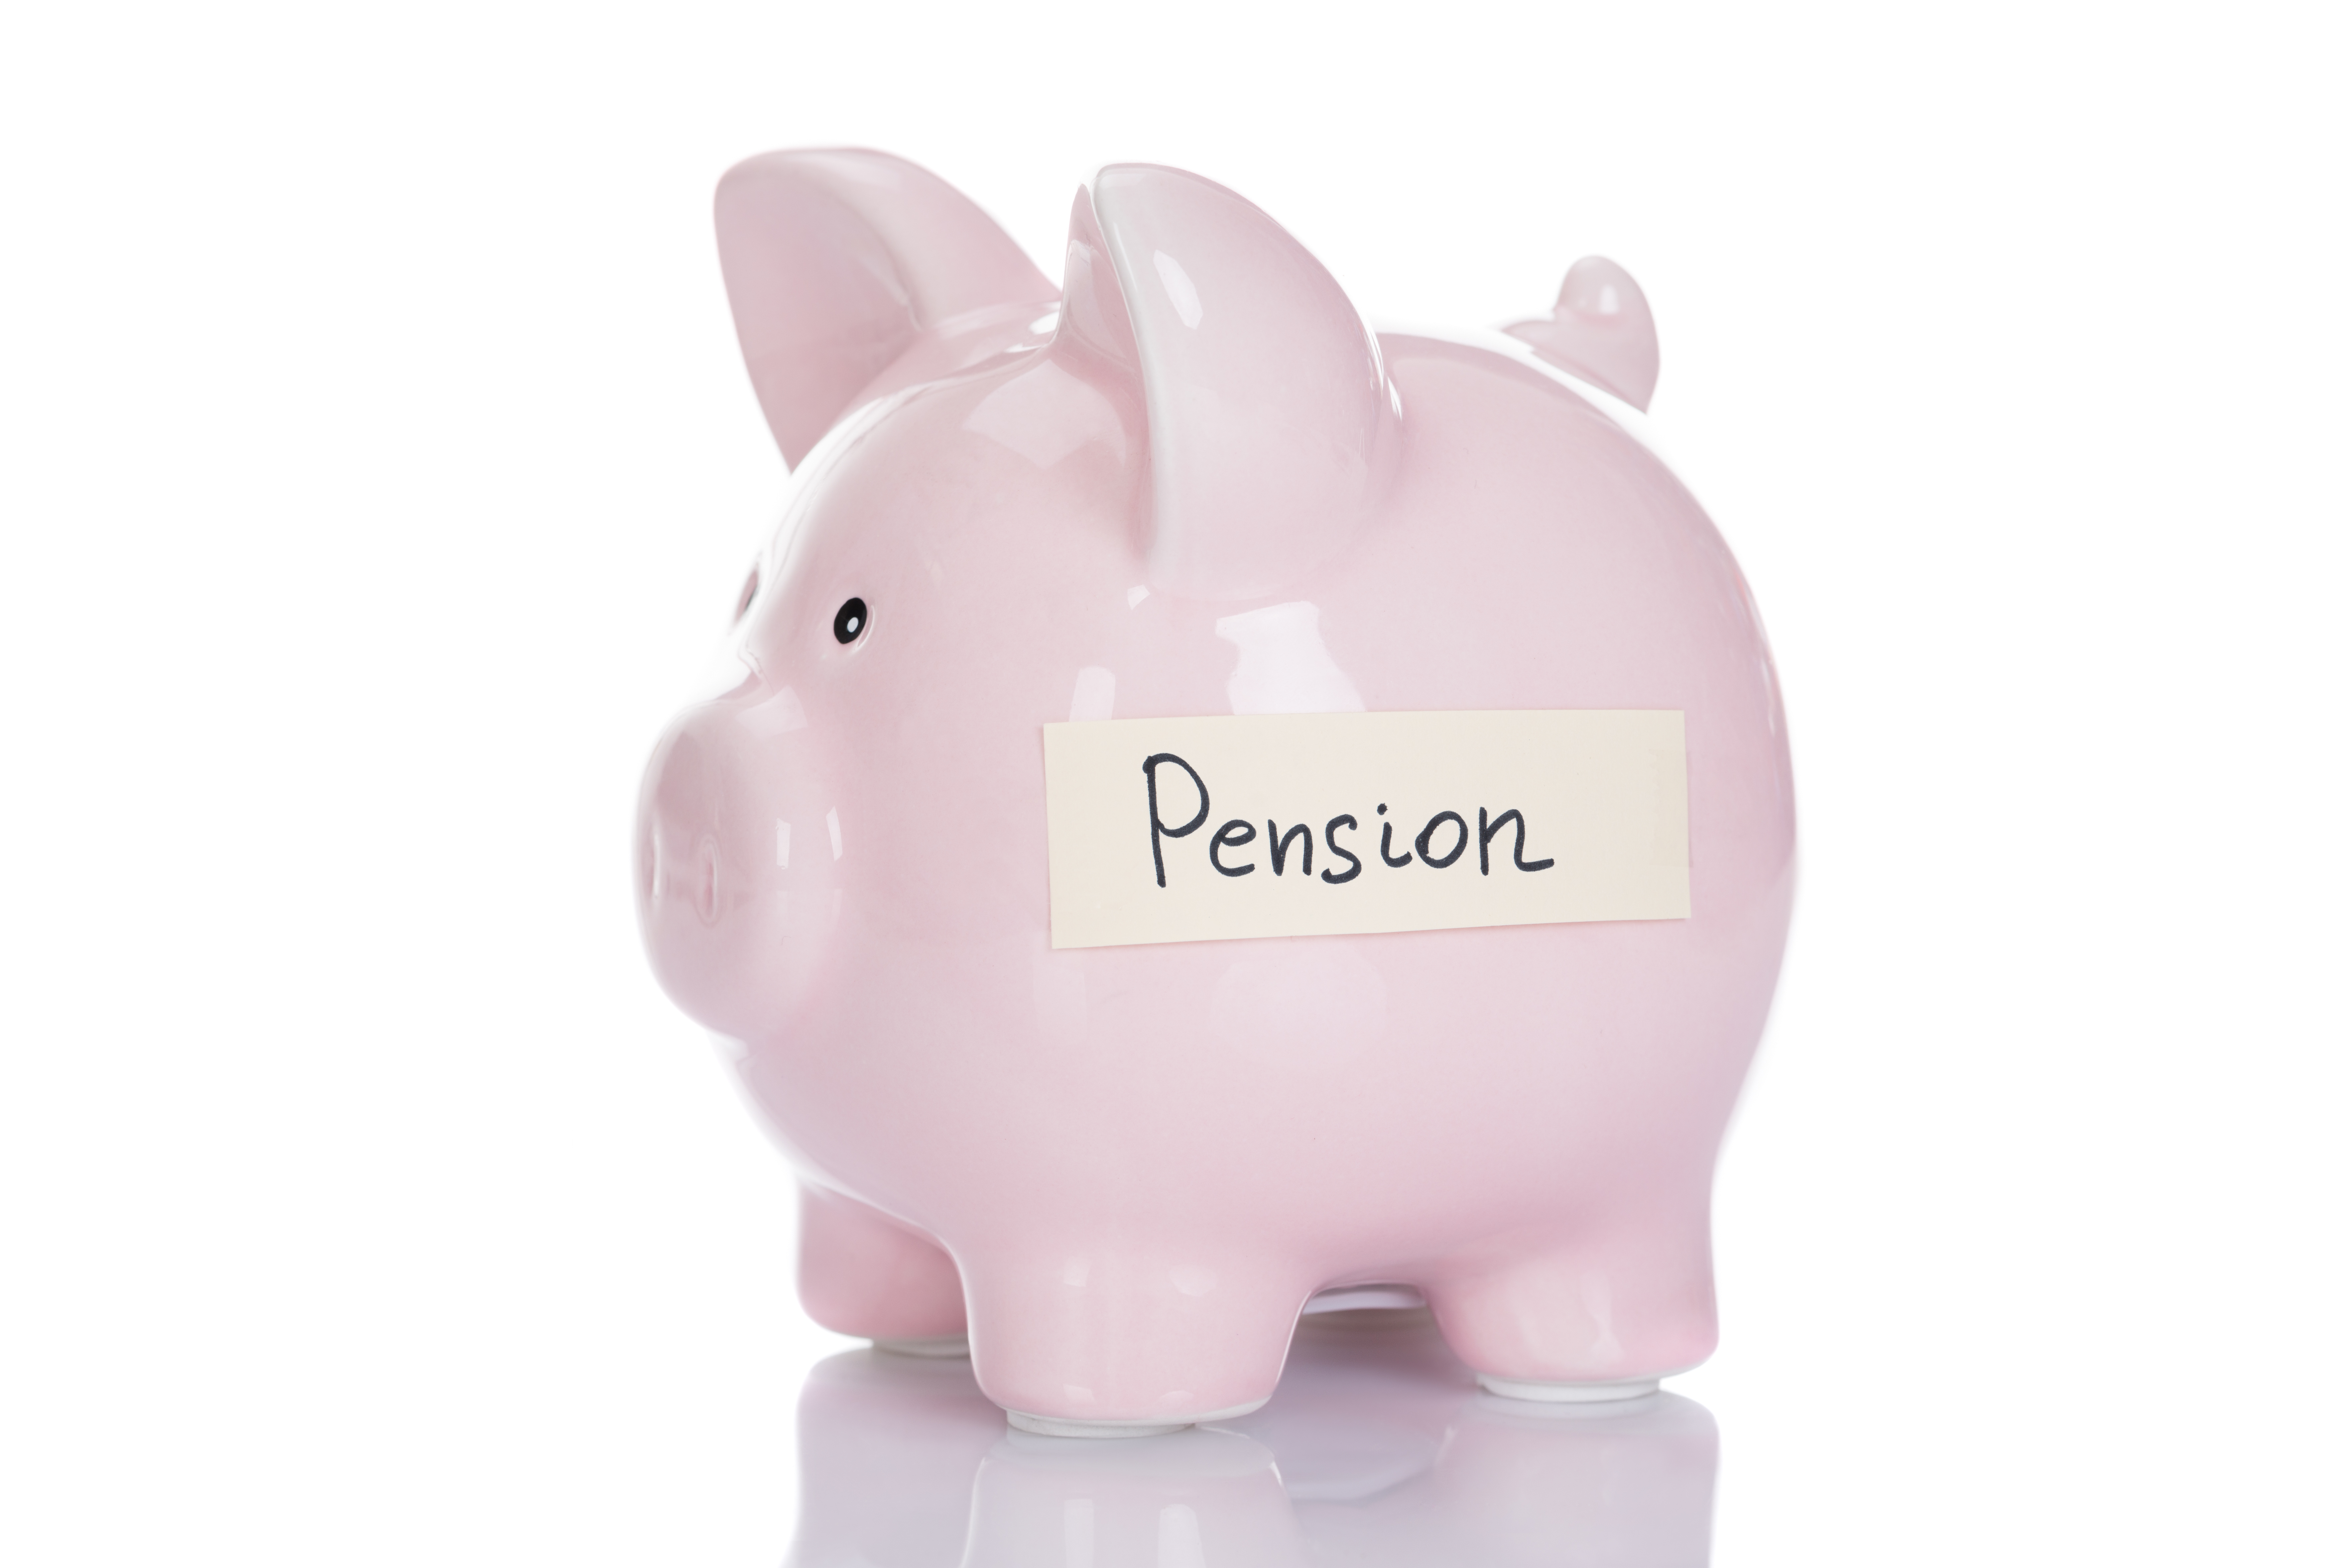 Pension Reform Newsletter – May 2018